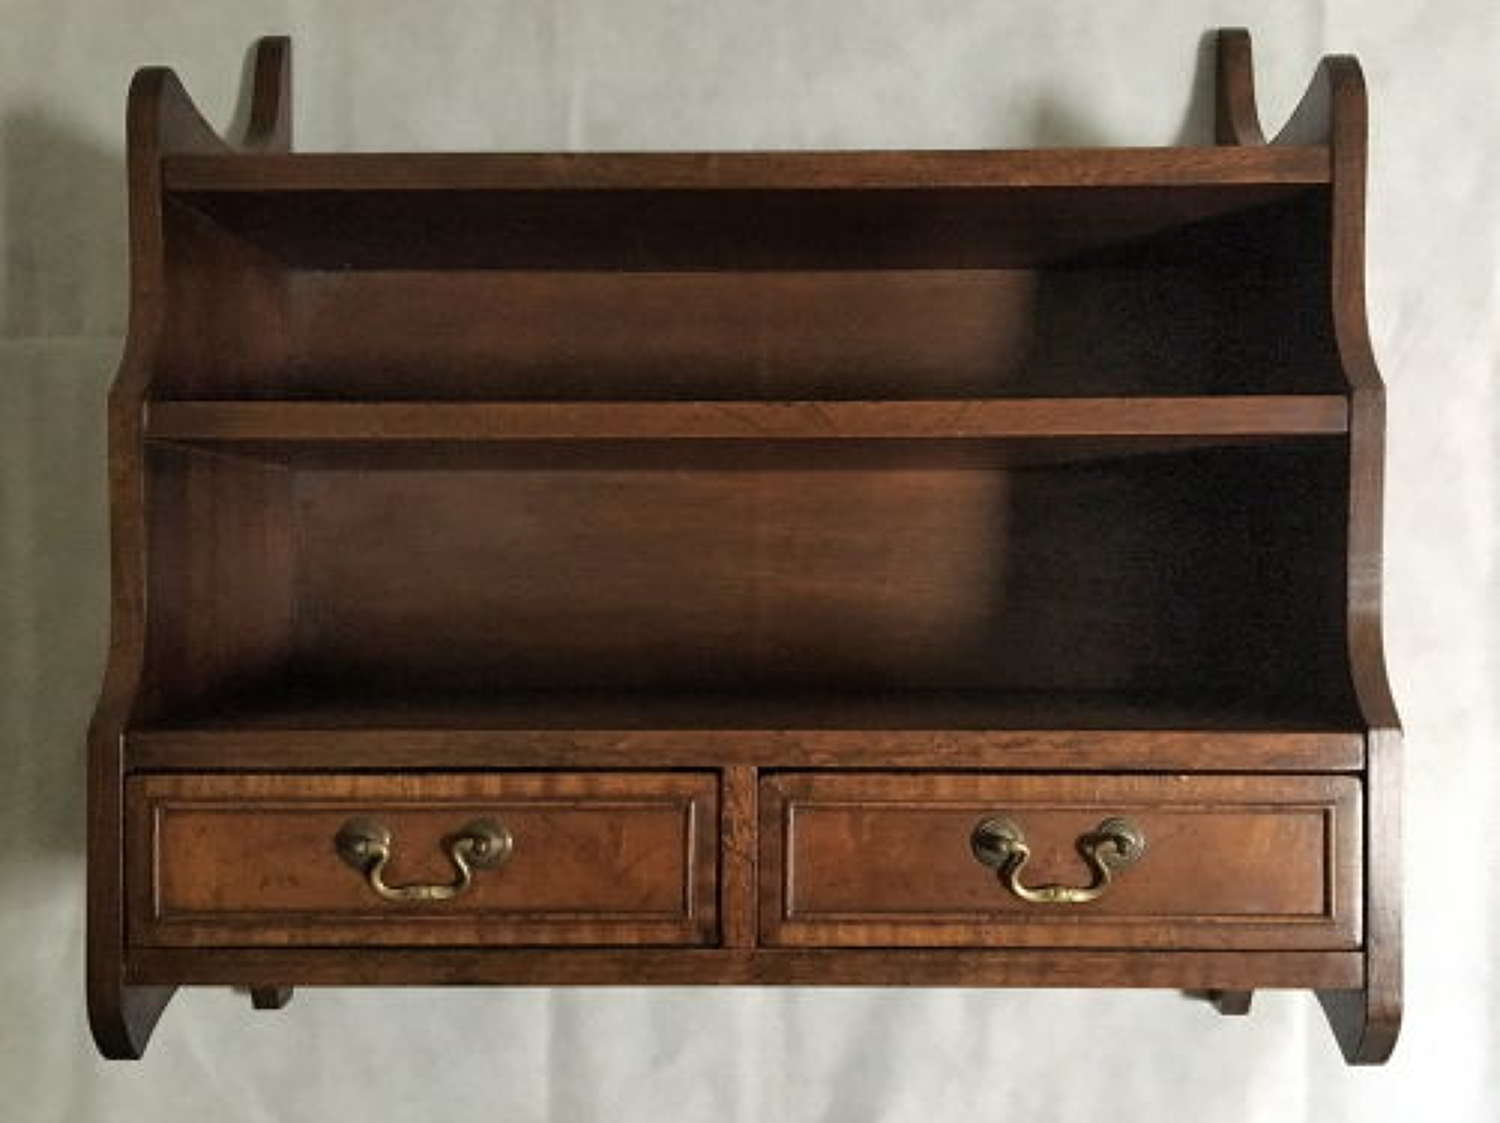 Mahogany Wall Shelf with Two Shorts Drawers